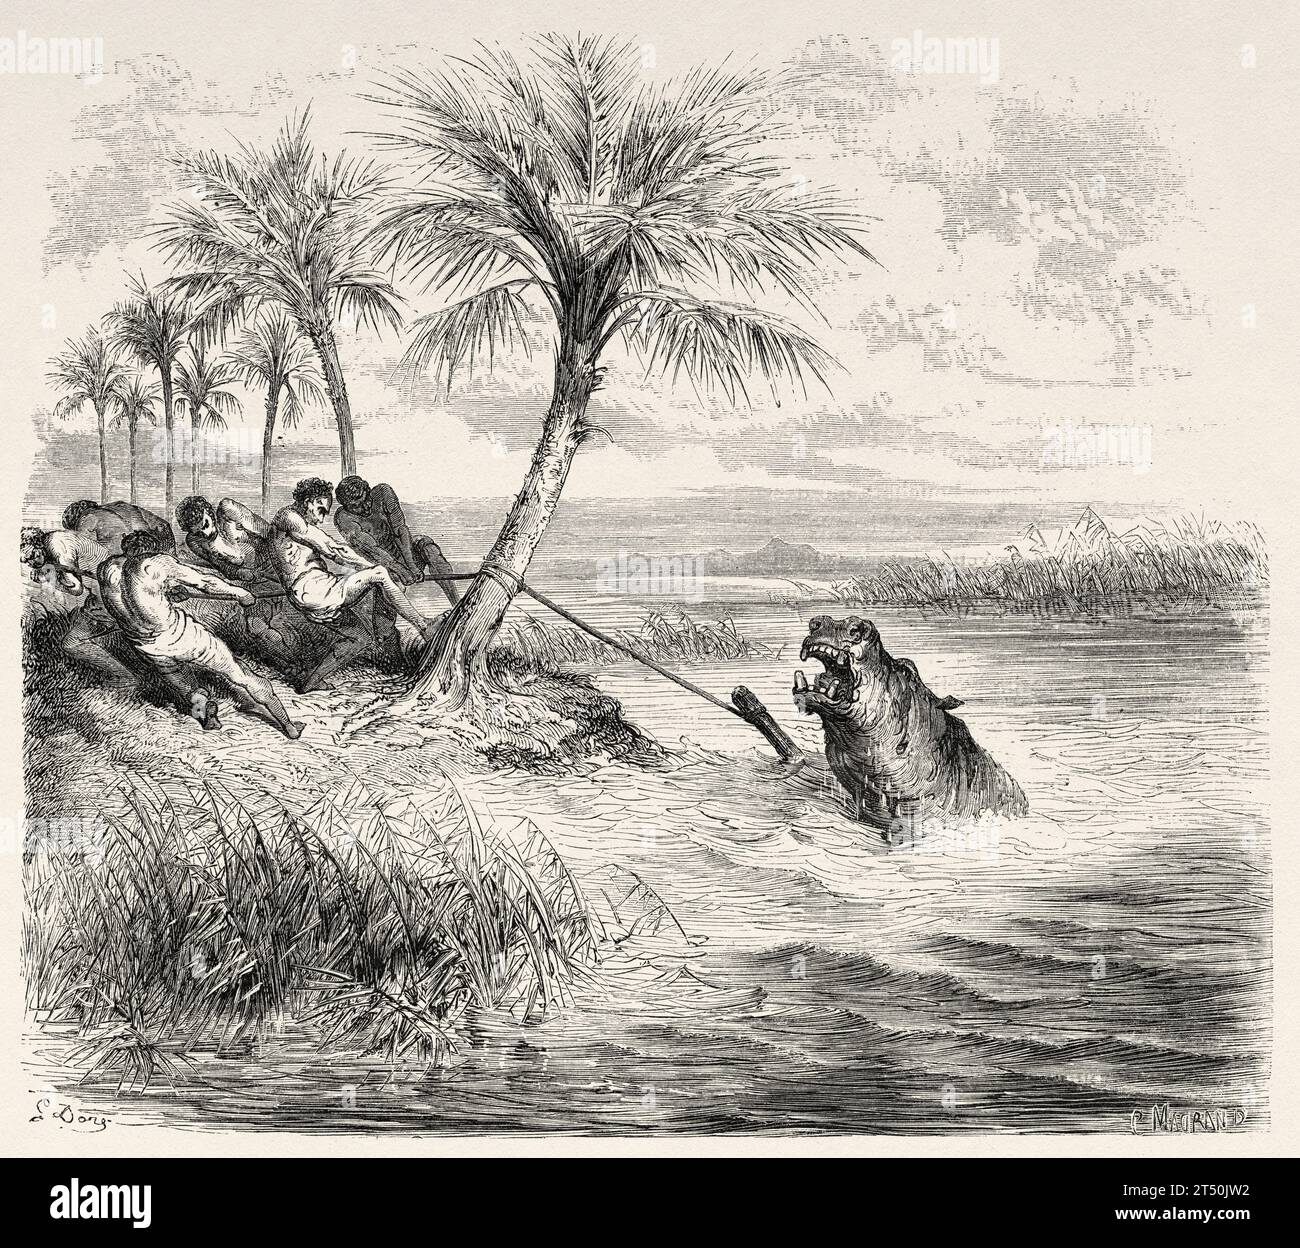 Indigenous people capturing a hippopotamus with a harpoon, Africa. Adventures and Hunts of the Traveler Charles John Andersson in Southern Africa from 1850 to 1860. Old 19th century illustration by Gustave Doré (1832 - 1883) from Le Tour du Monde 1860 Stock Photo